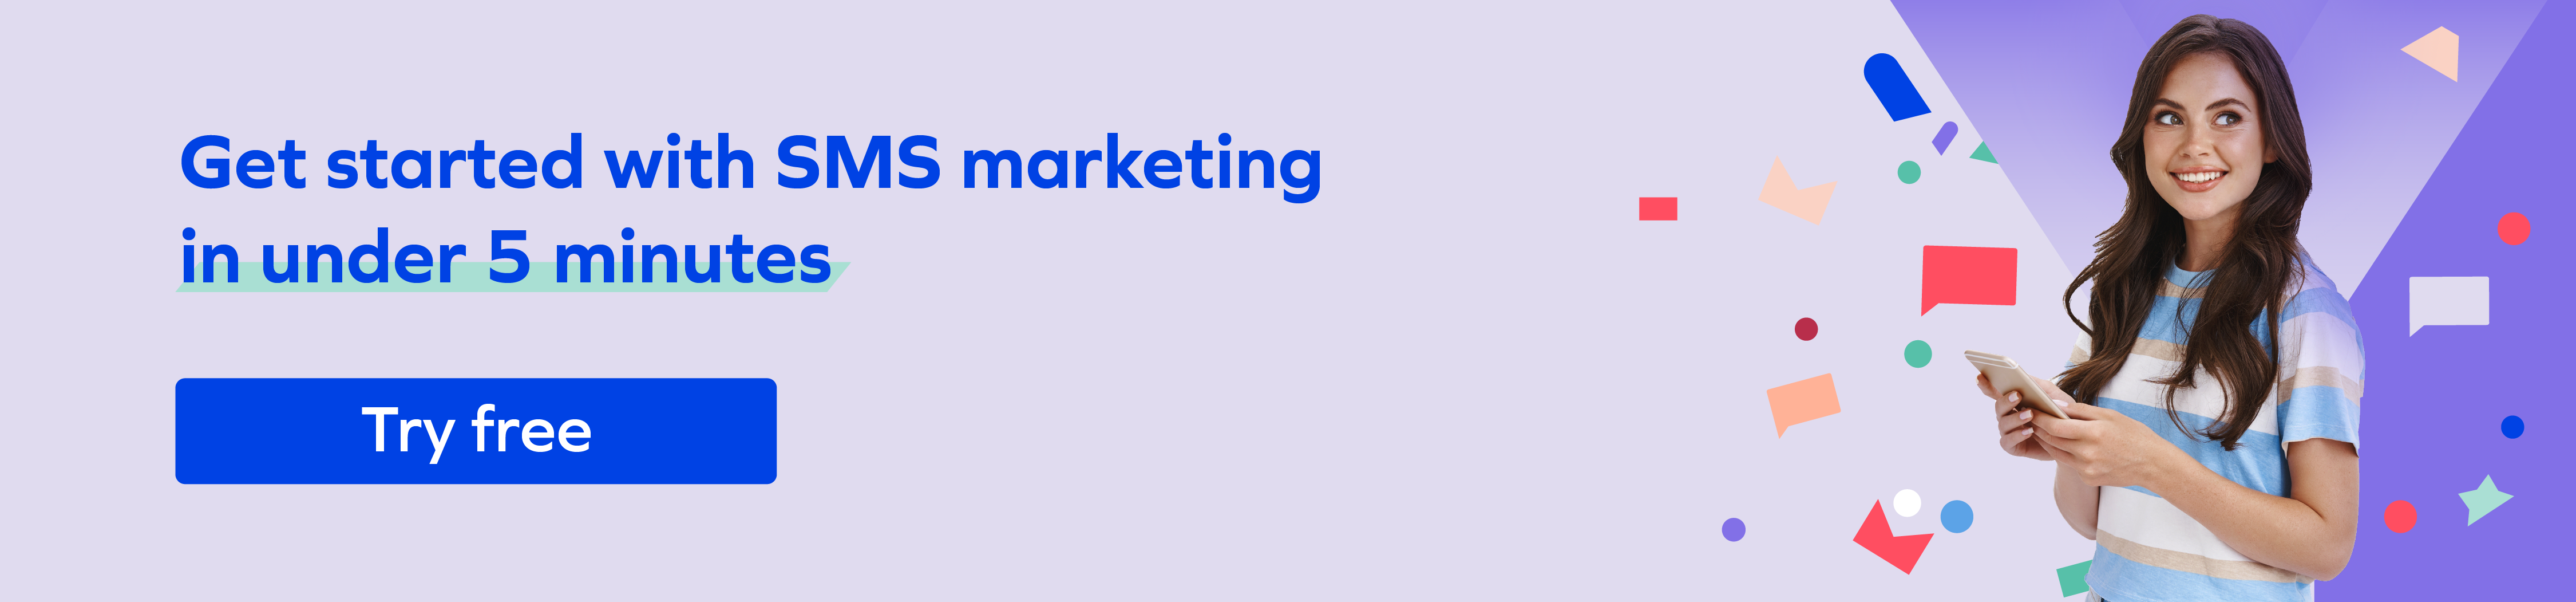 SMS marketing template